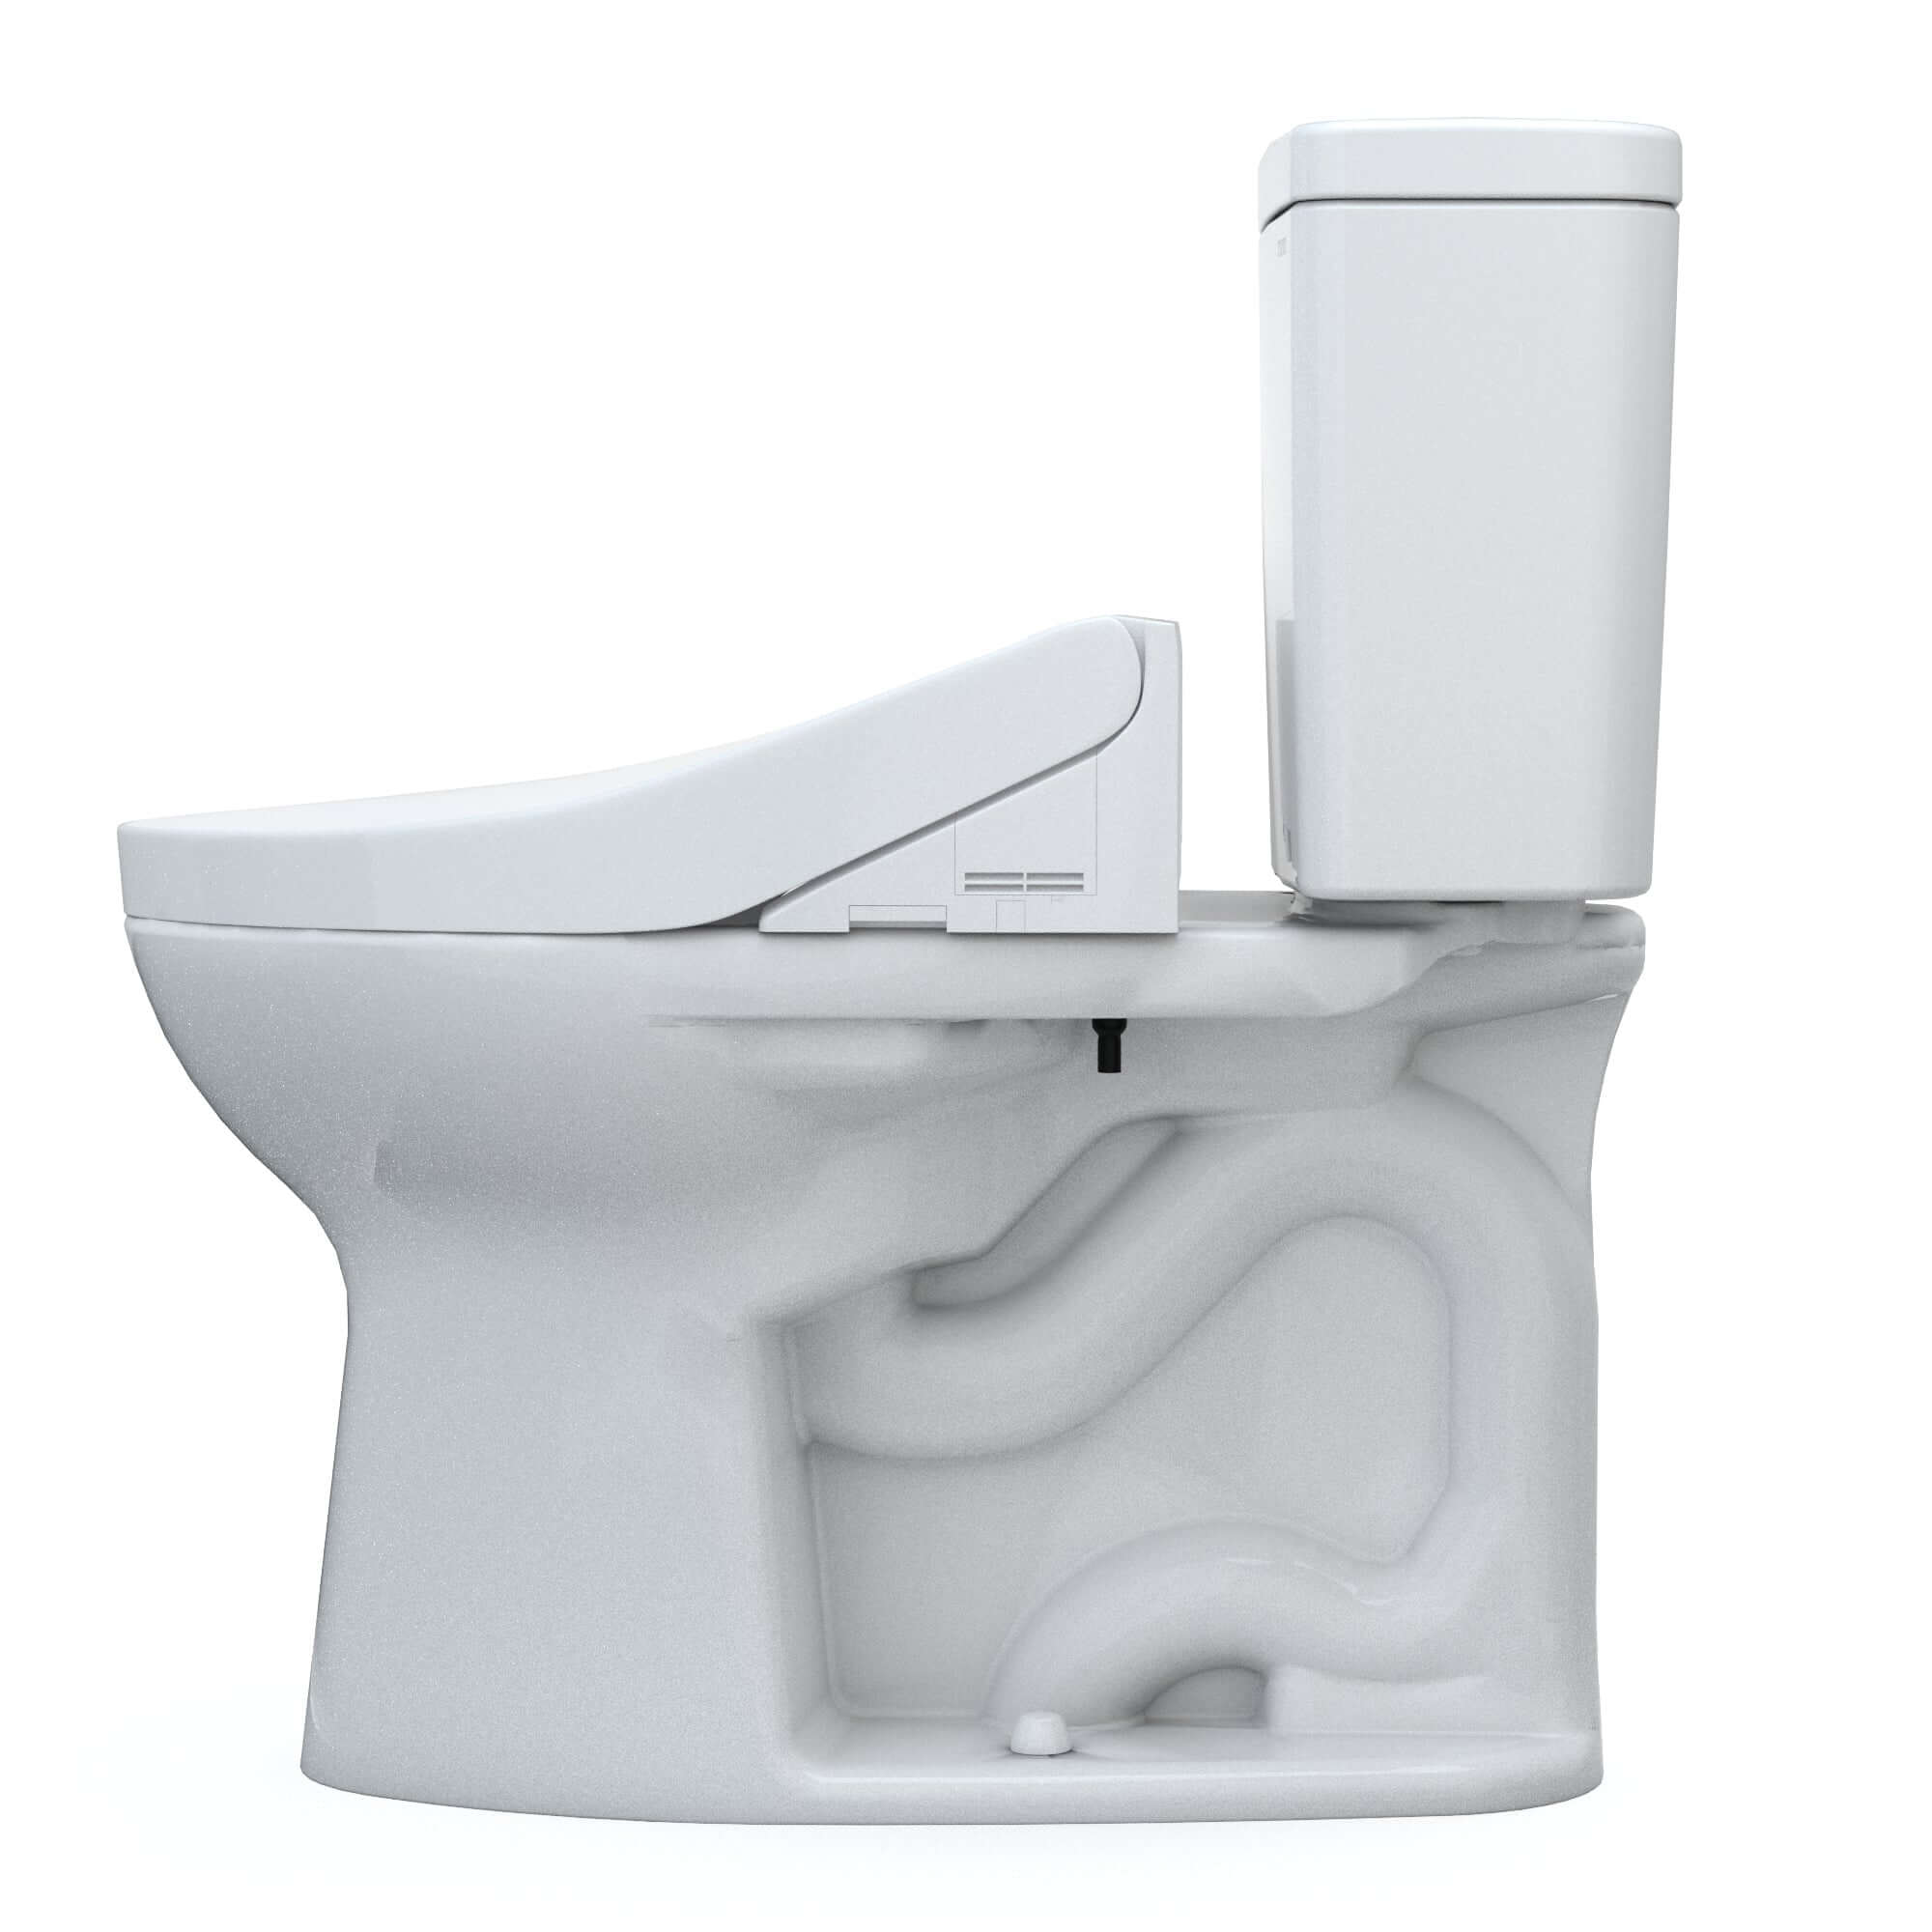 TOTO Drake WASHLET+ Two-Piece Elongated 1.28 GPF Universal Height with C5 Bidet Seat, 10 Inch Rough-In - MW7763084CEFG.10#01